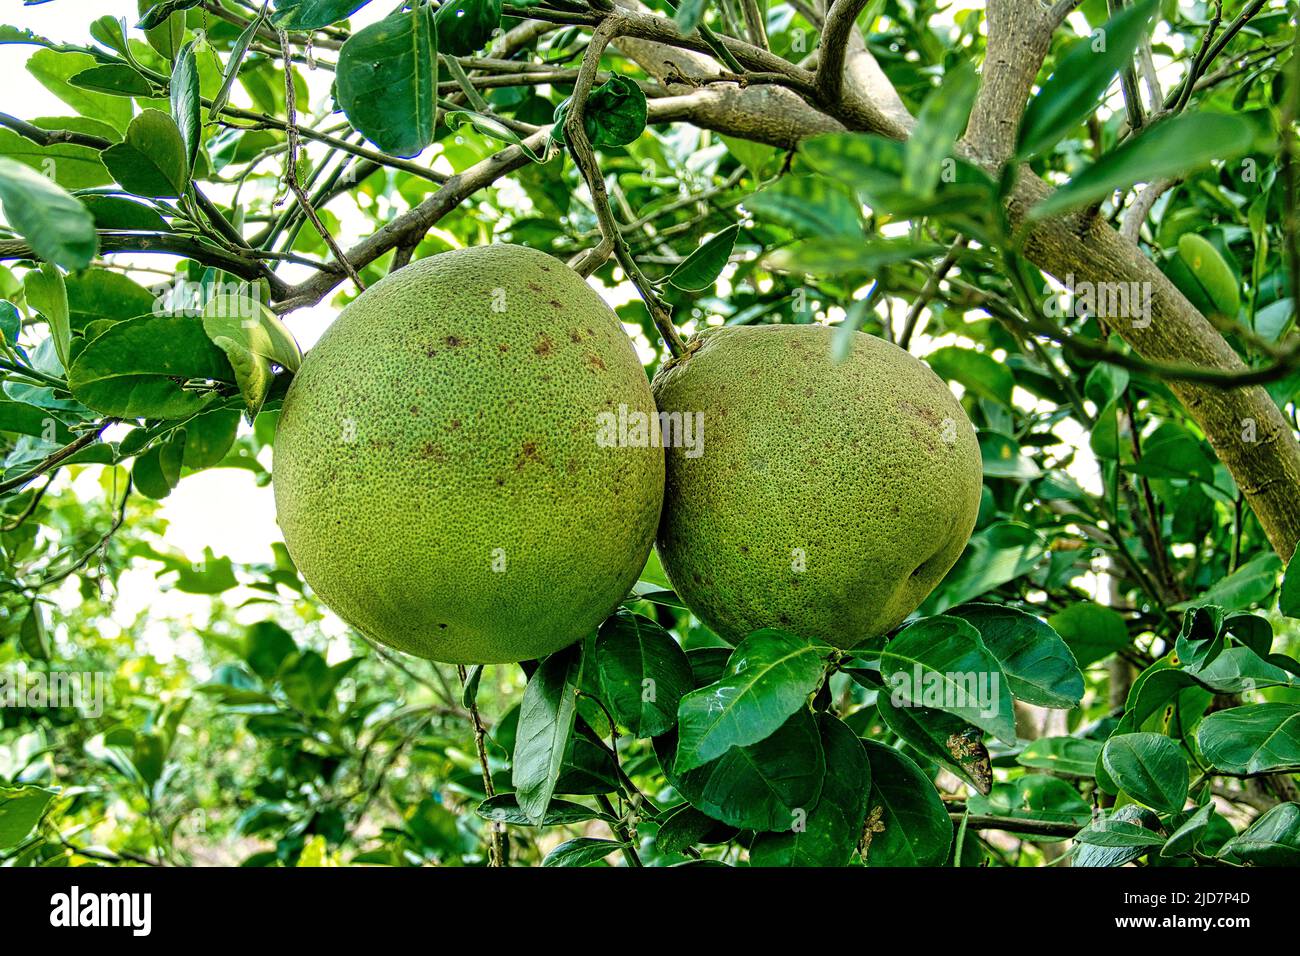 Pomelos growing on a tree in Thailand Stock Photo